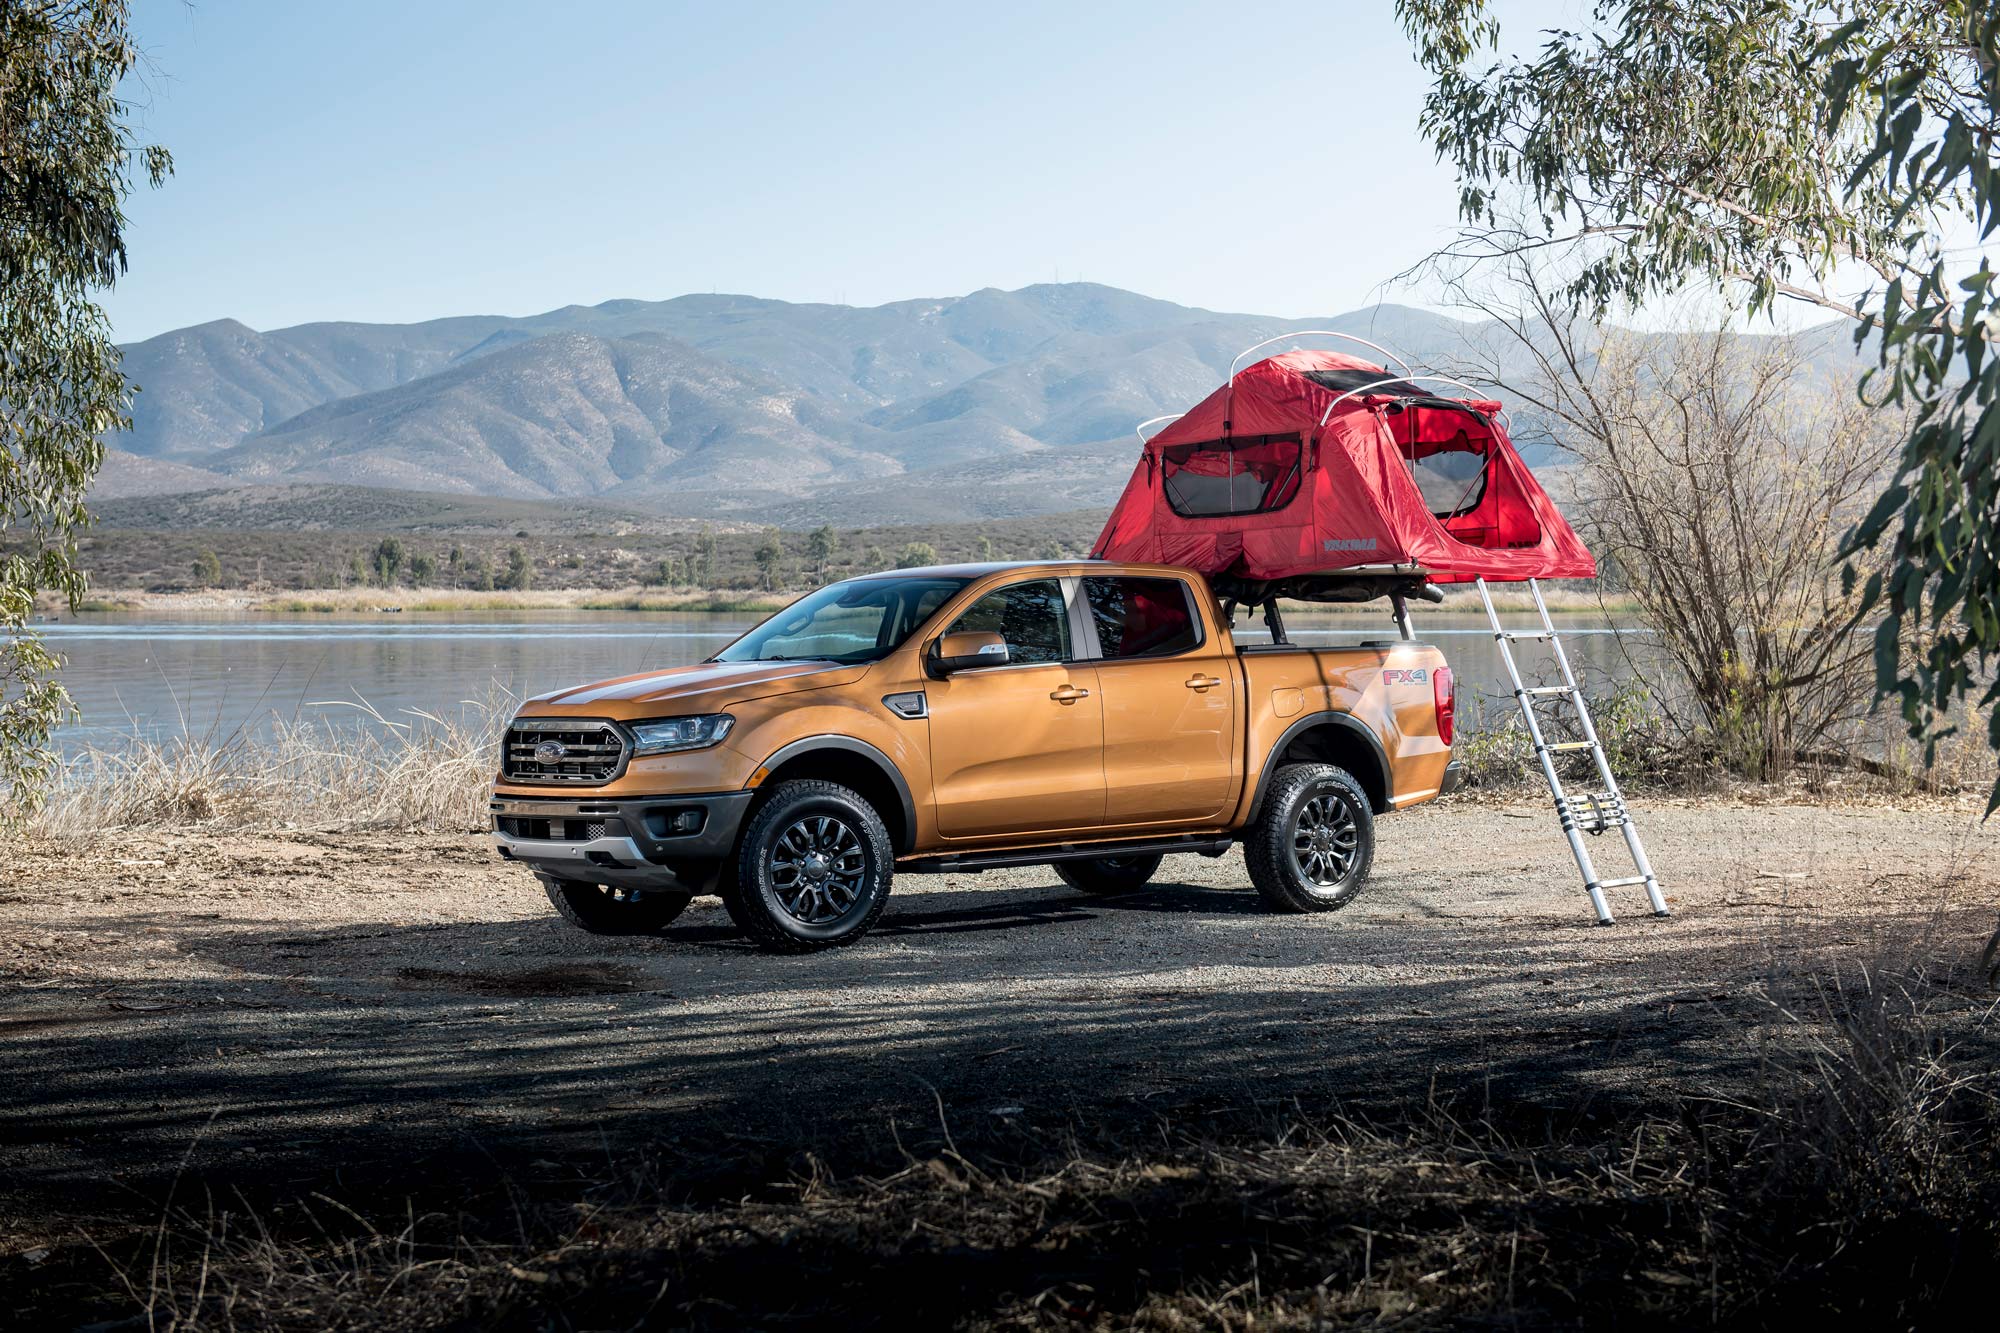 Ford Ranger FX4 with pop-up camper deployed parked near a lake.